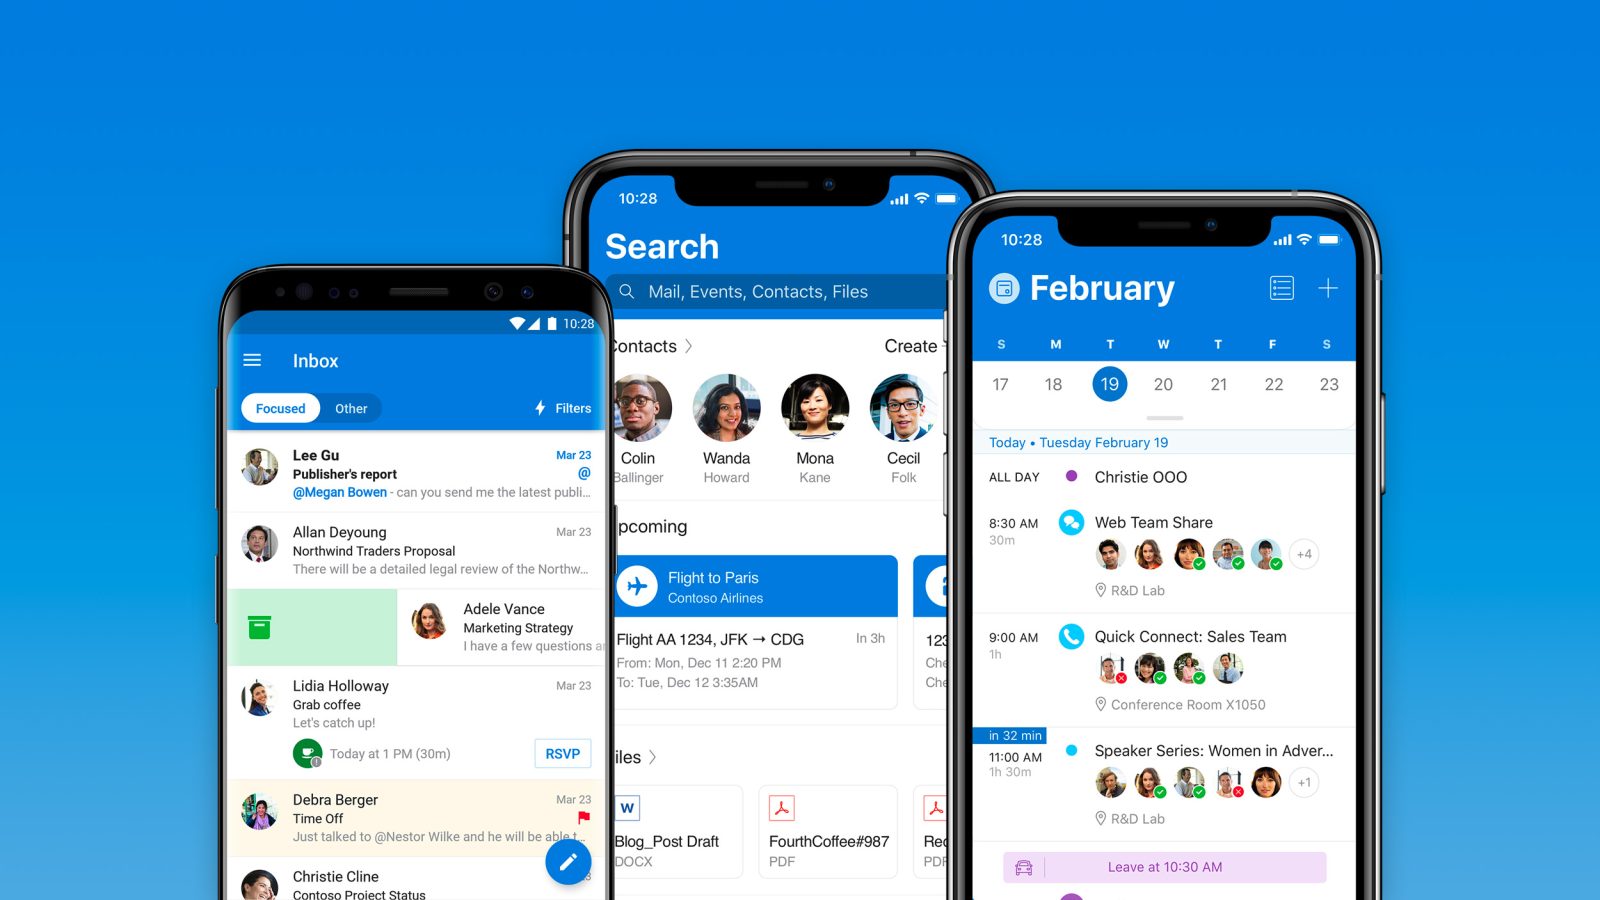 Microsoft Outlook is now showing more ads in its iOS and Android app